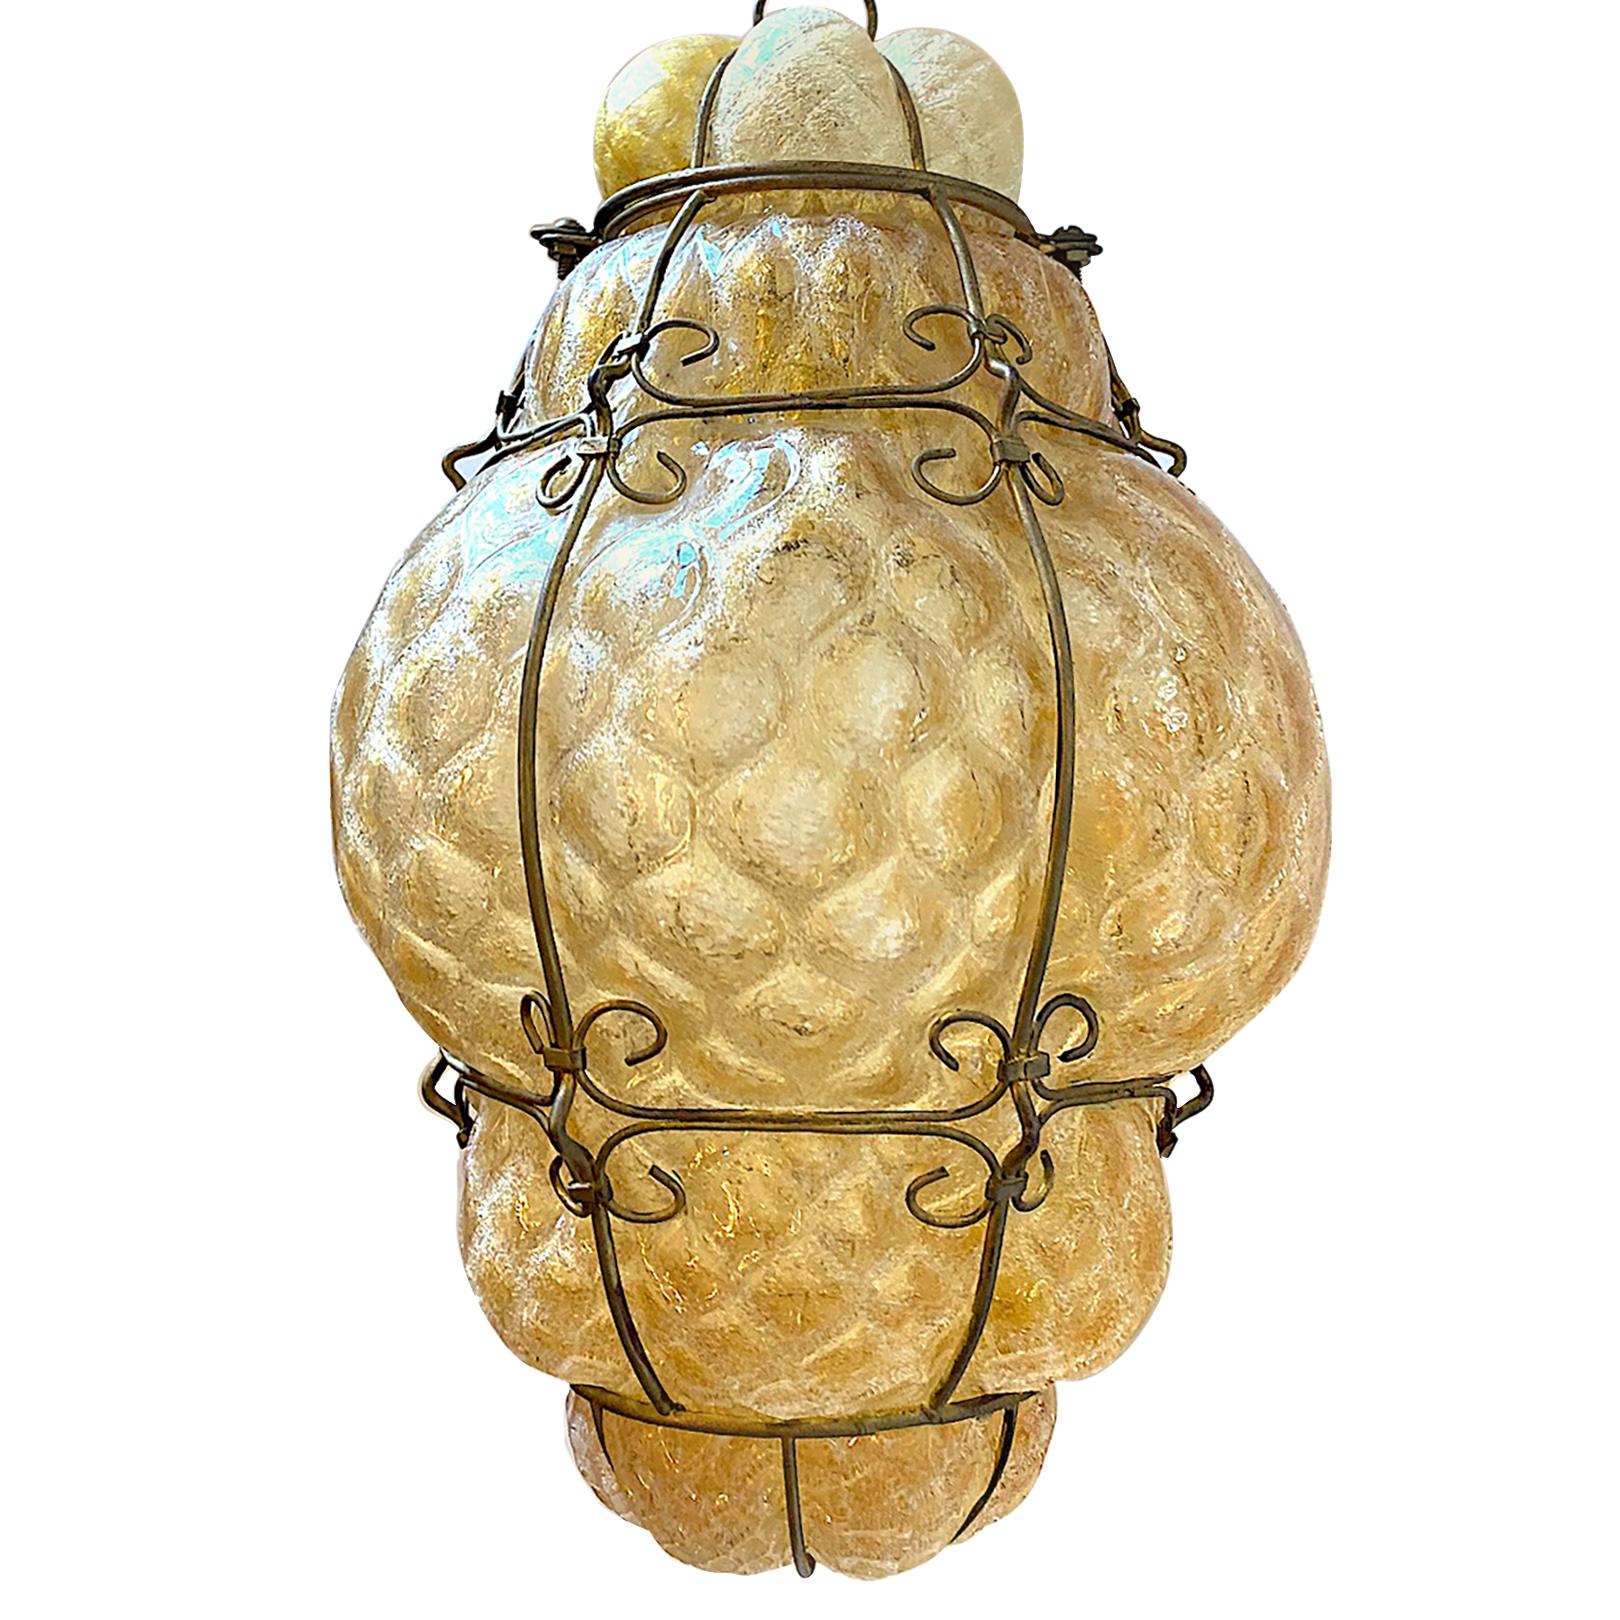 A circa 1930s Italian Amber blown glass lantern with iron work and an interior light.

Measurements:
Drop: 21